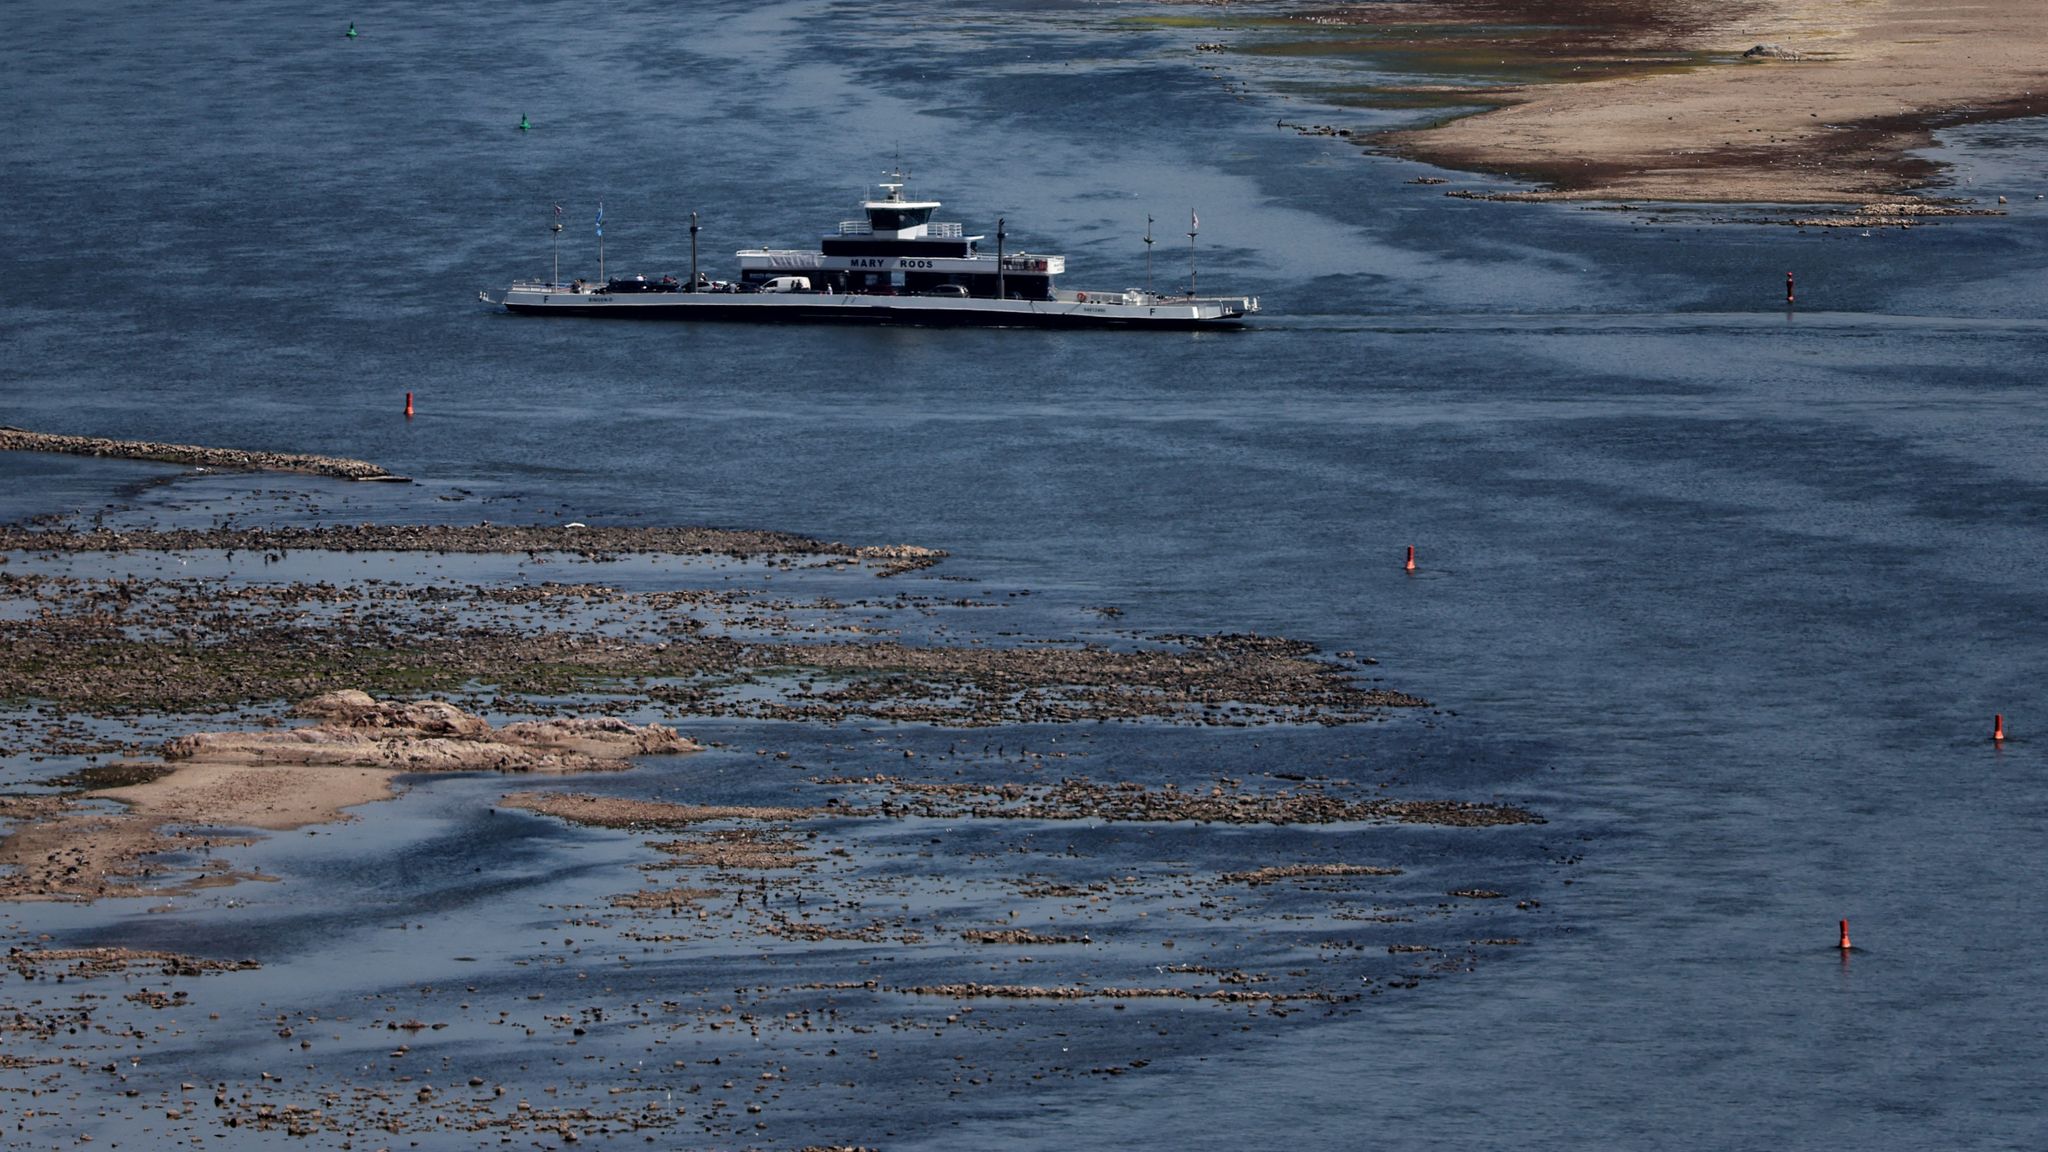 Images show extremely low water levels along Rhine River